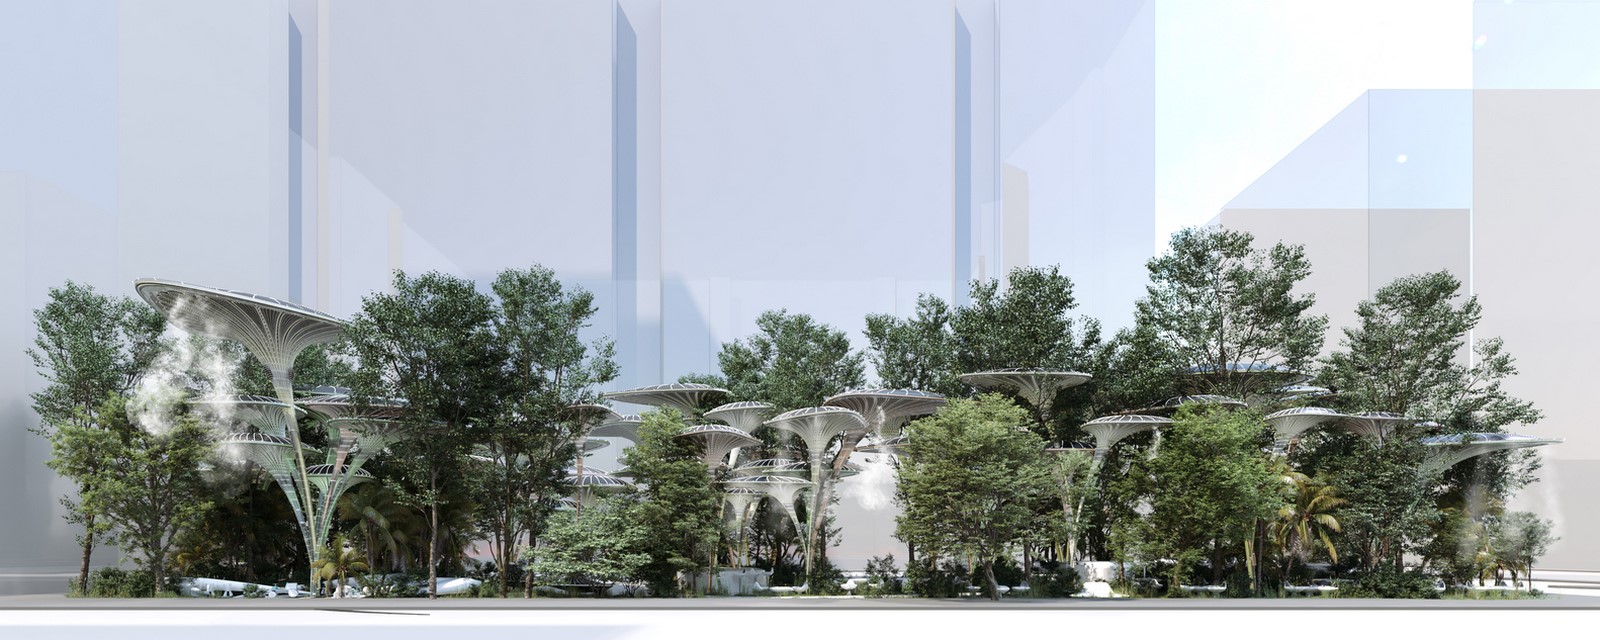 Cooling Stations for Abu Dhabi's Urban Heat Island designed by Mask Architects - Sheet1